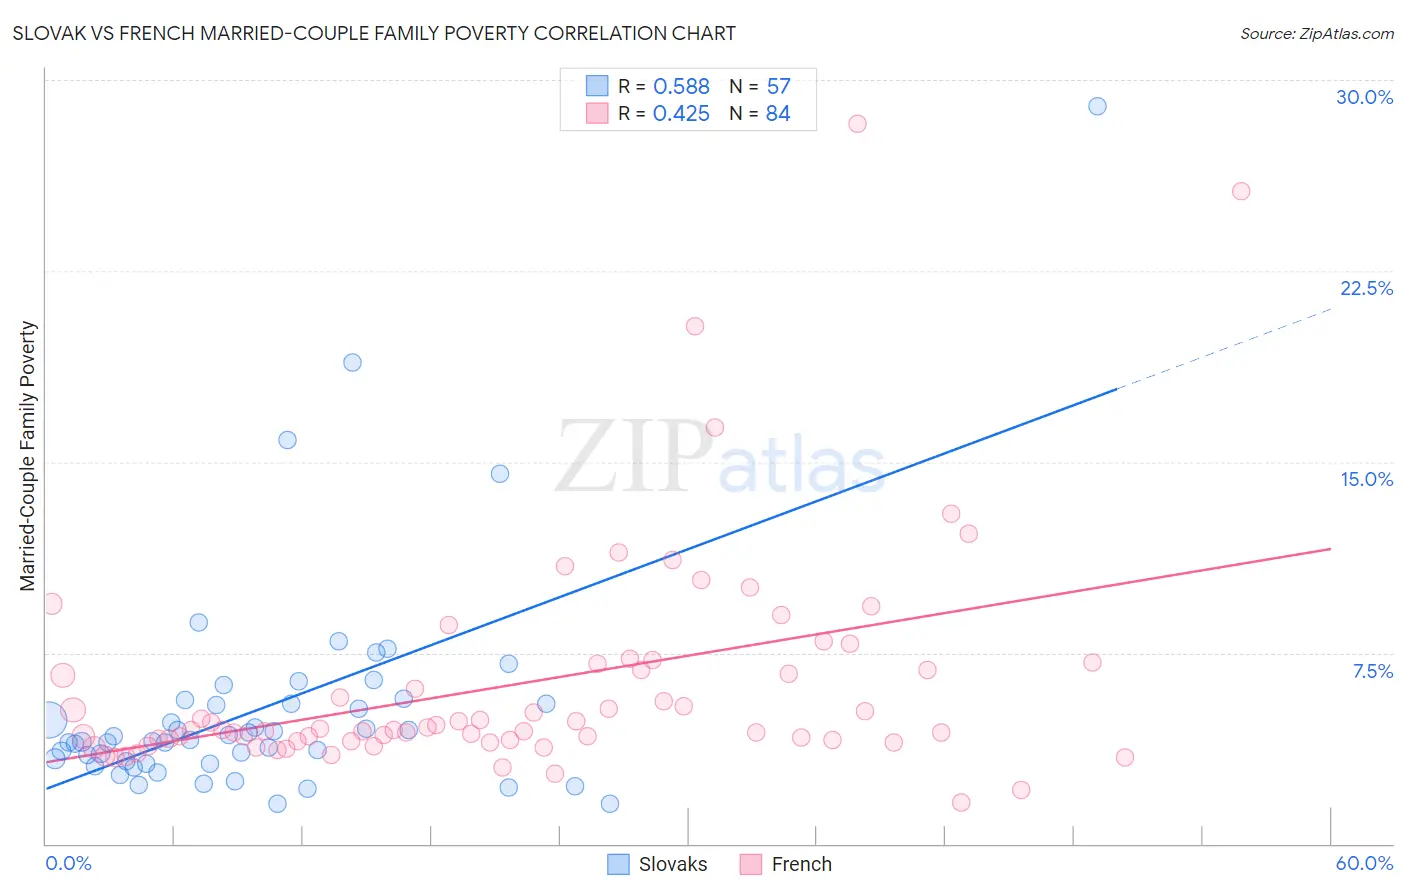 Slovak vs French Married-Couple Family Poverty